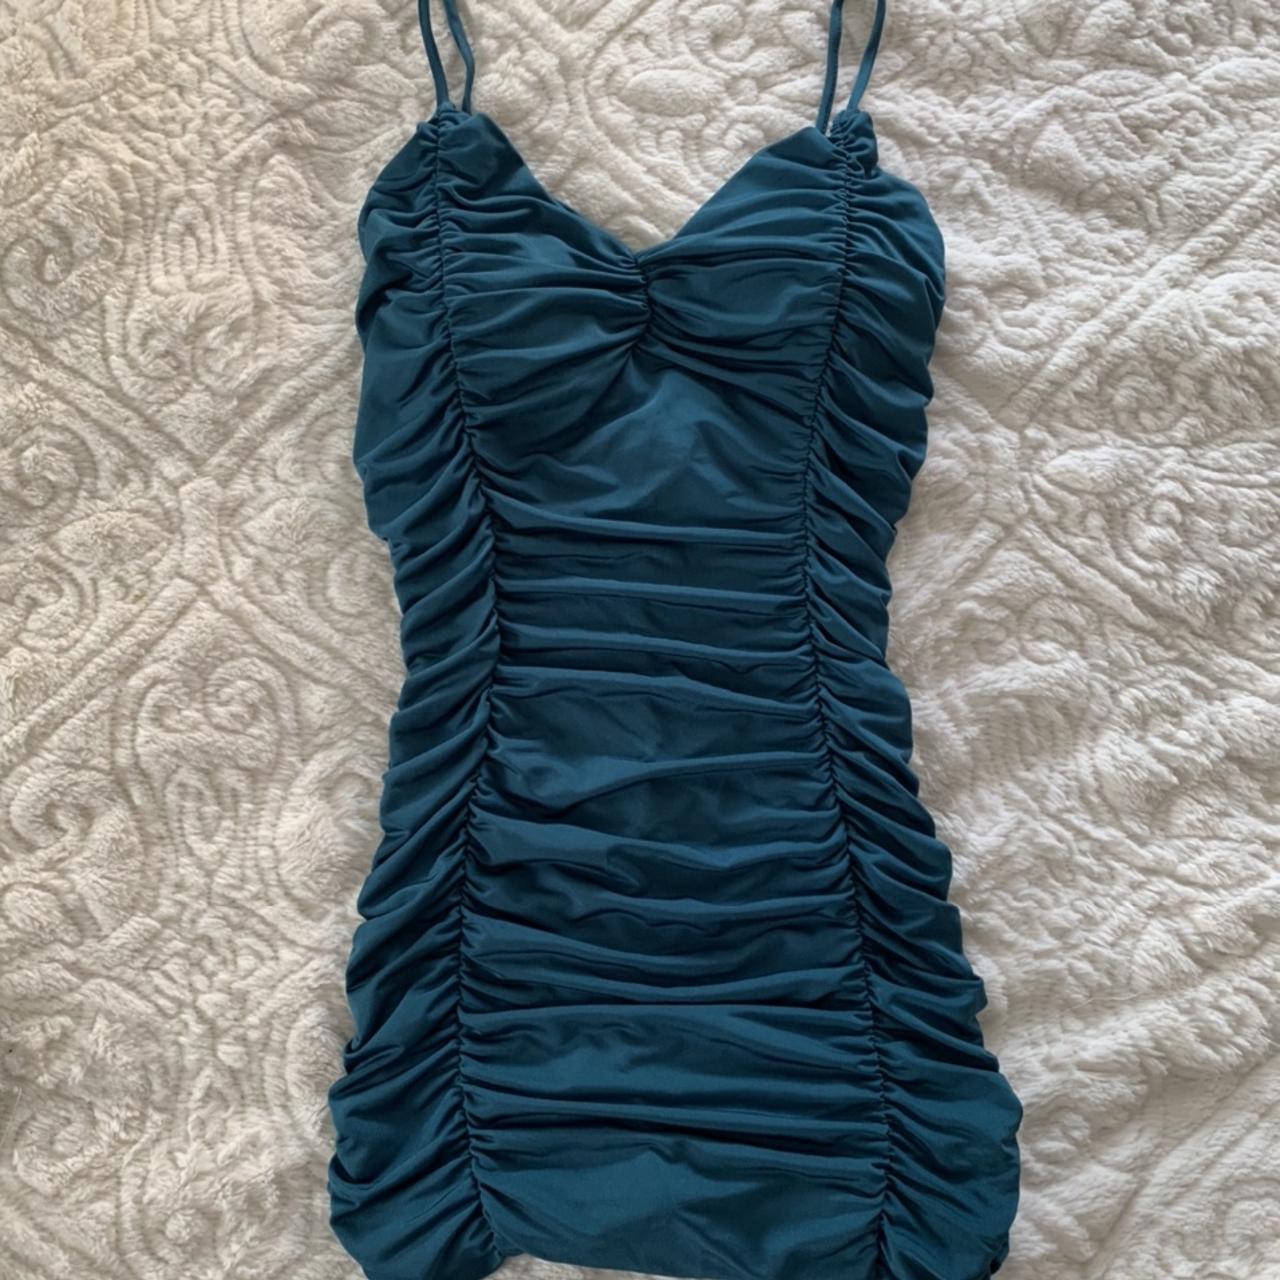 ARE YOU AM I Women's Green and Blue Dress | Depop